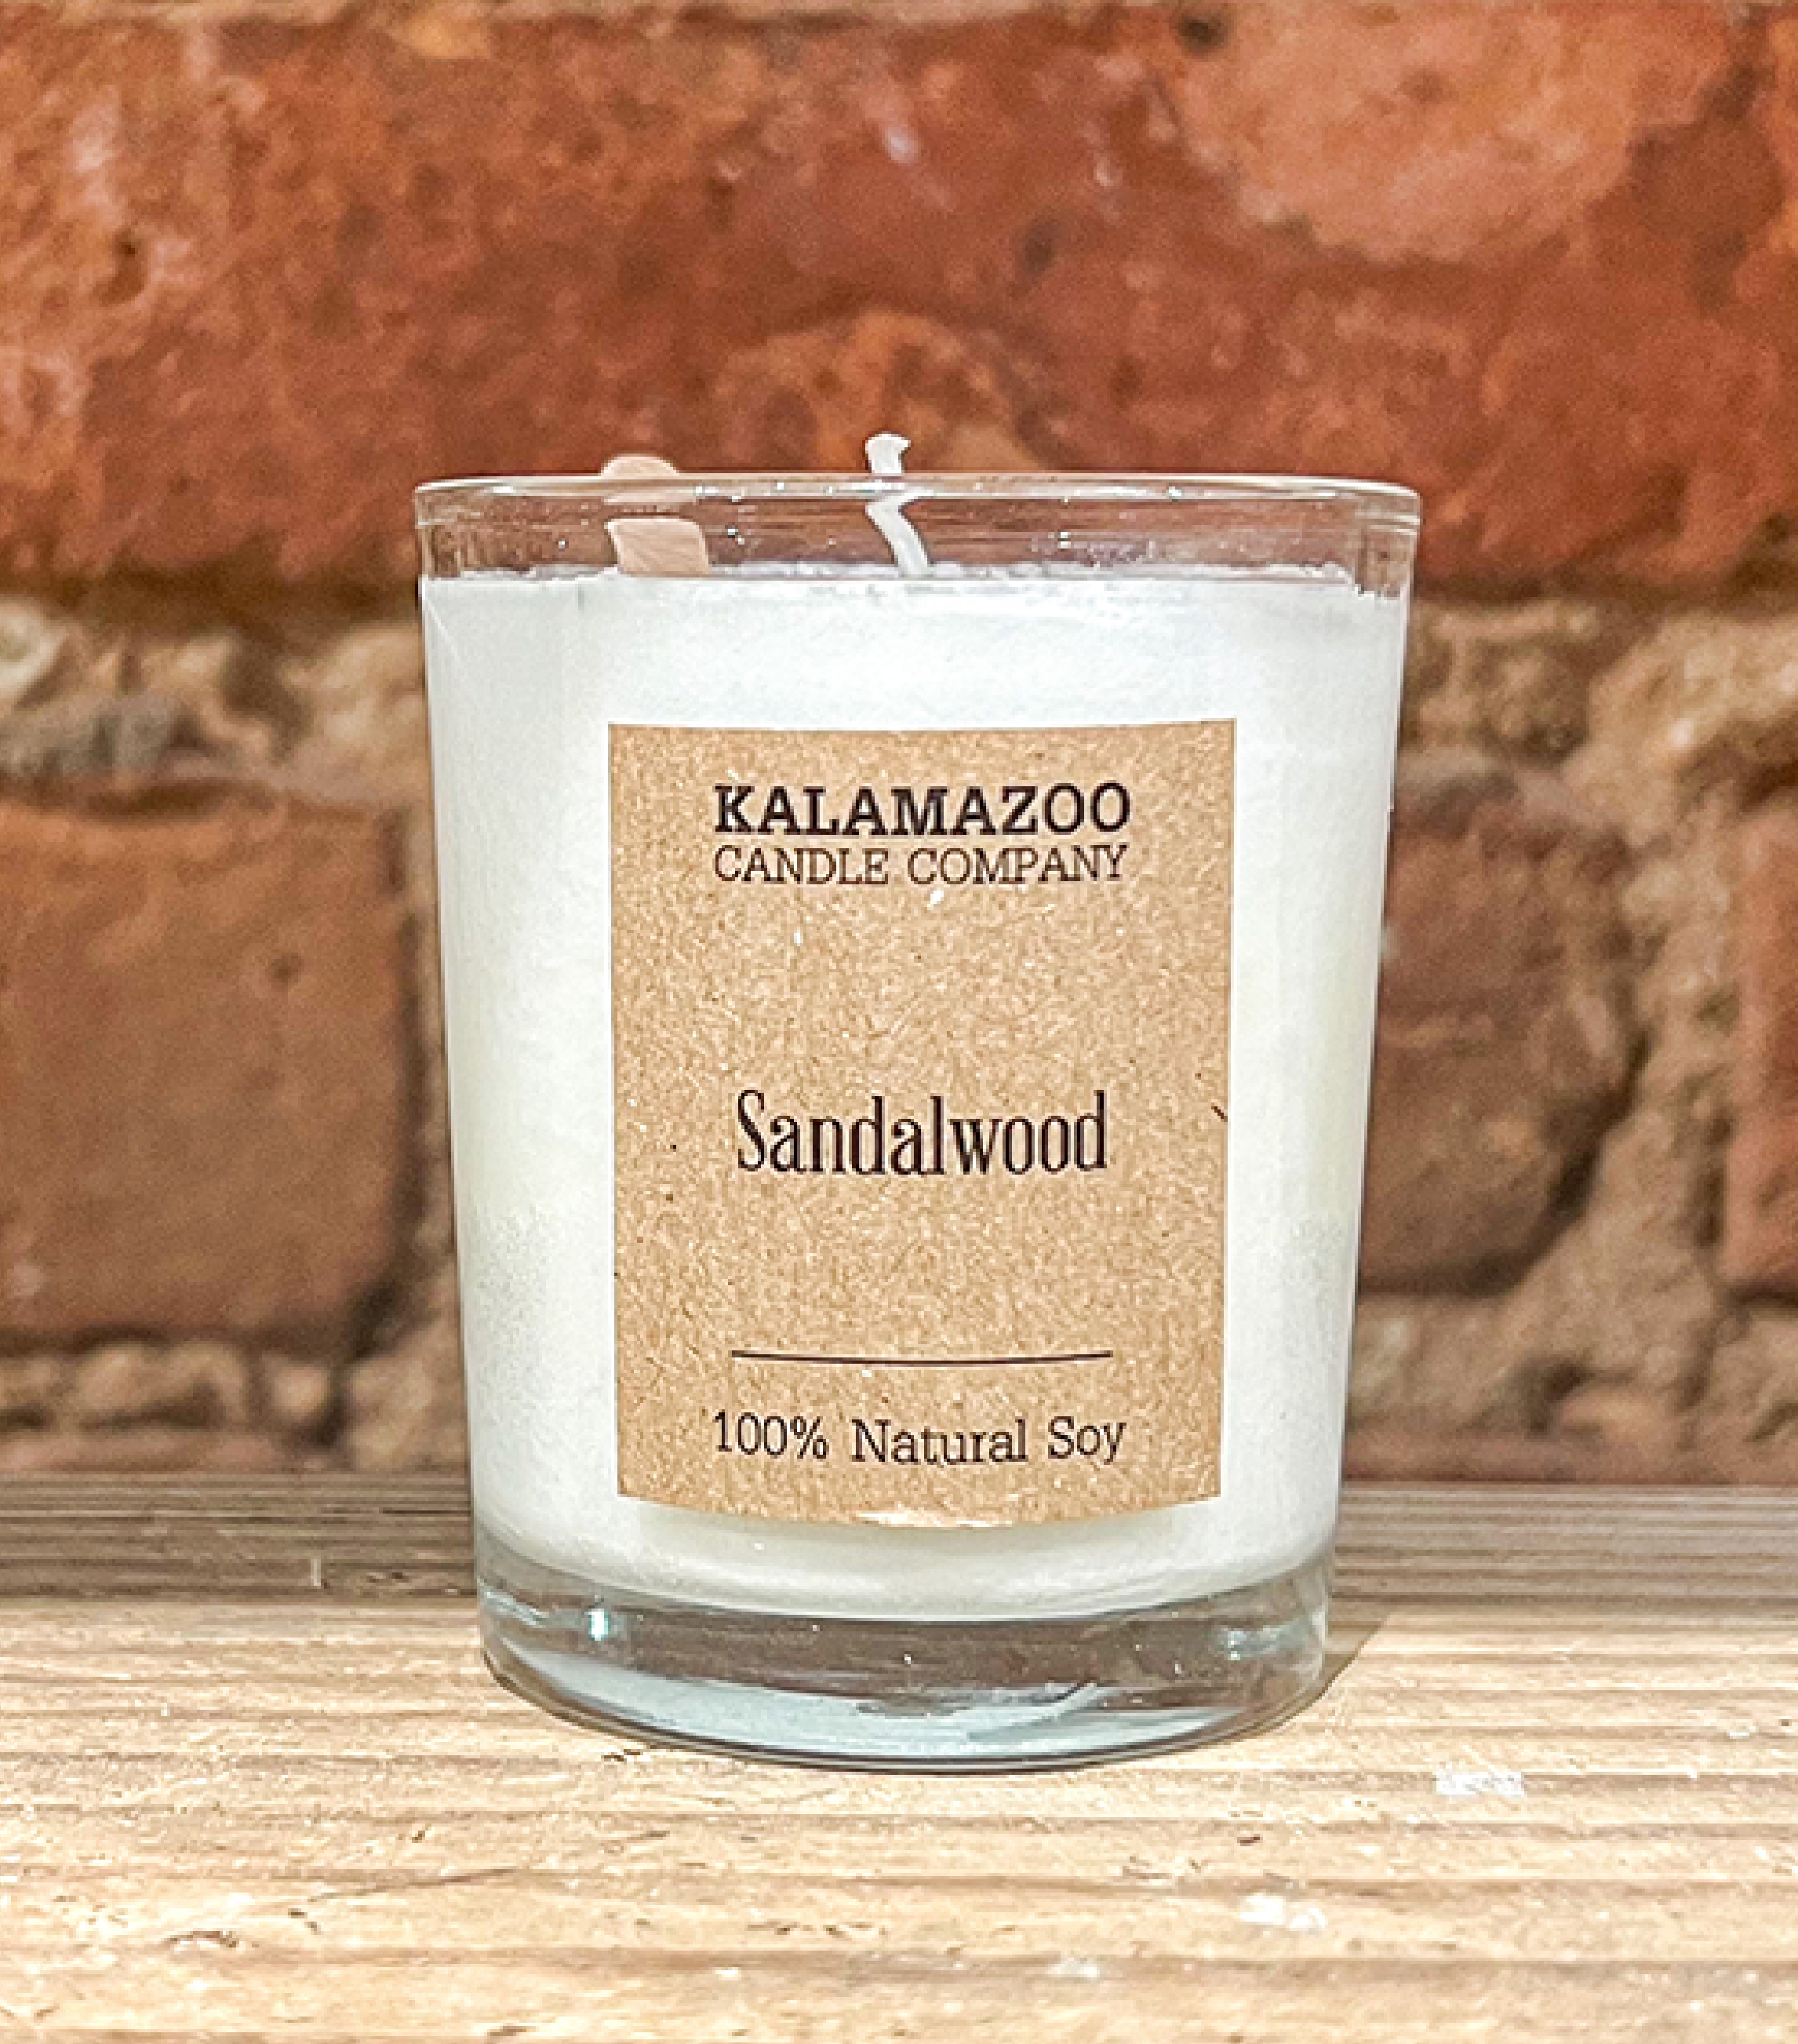 Sandalwood Candles This classic soy candle is an exotic and earthy blend of warm sandalwood, bergamot, and nutmeg. All Kalamazoo Candles are: 100% natural scented soy wax; produced using locally sourced and American-made materials; crafted from clean, hig